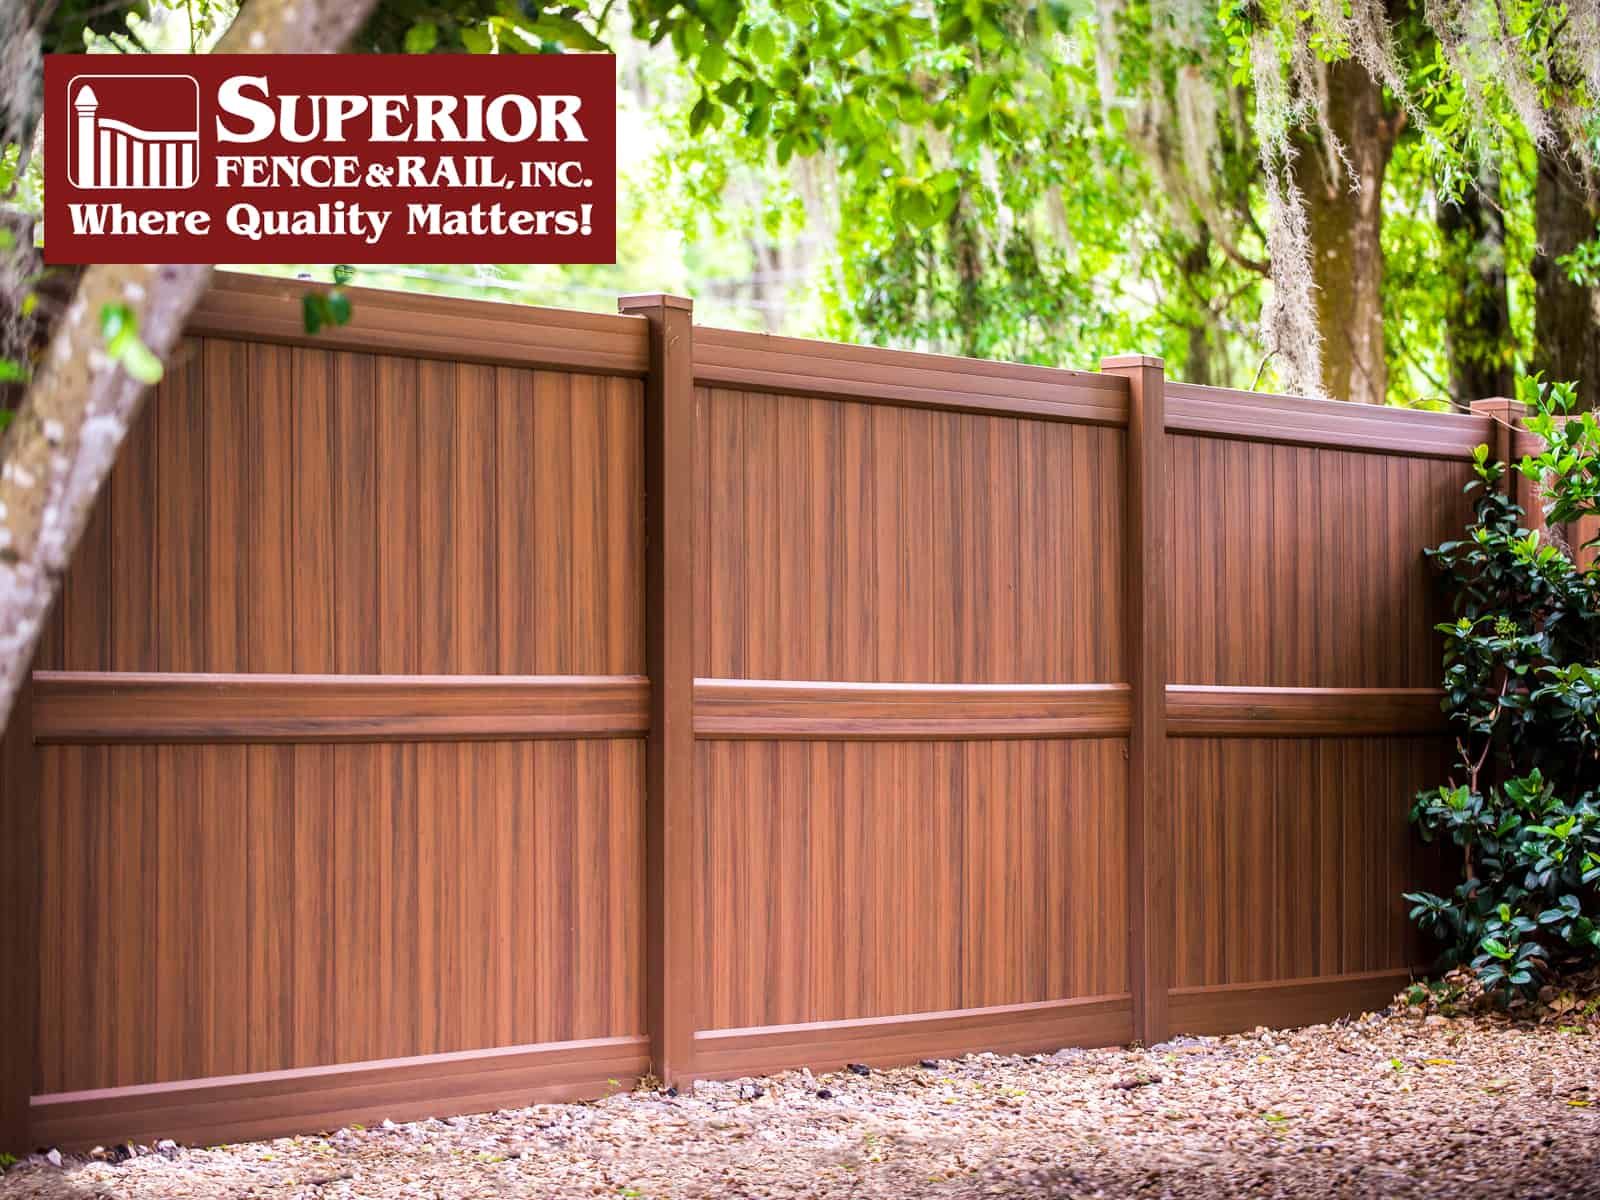 Smithtown Fence Company Contractor